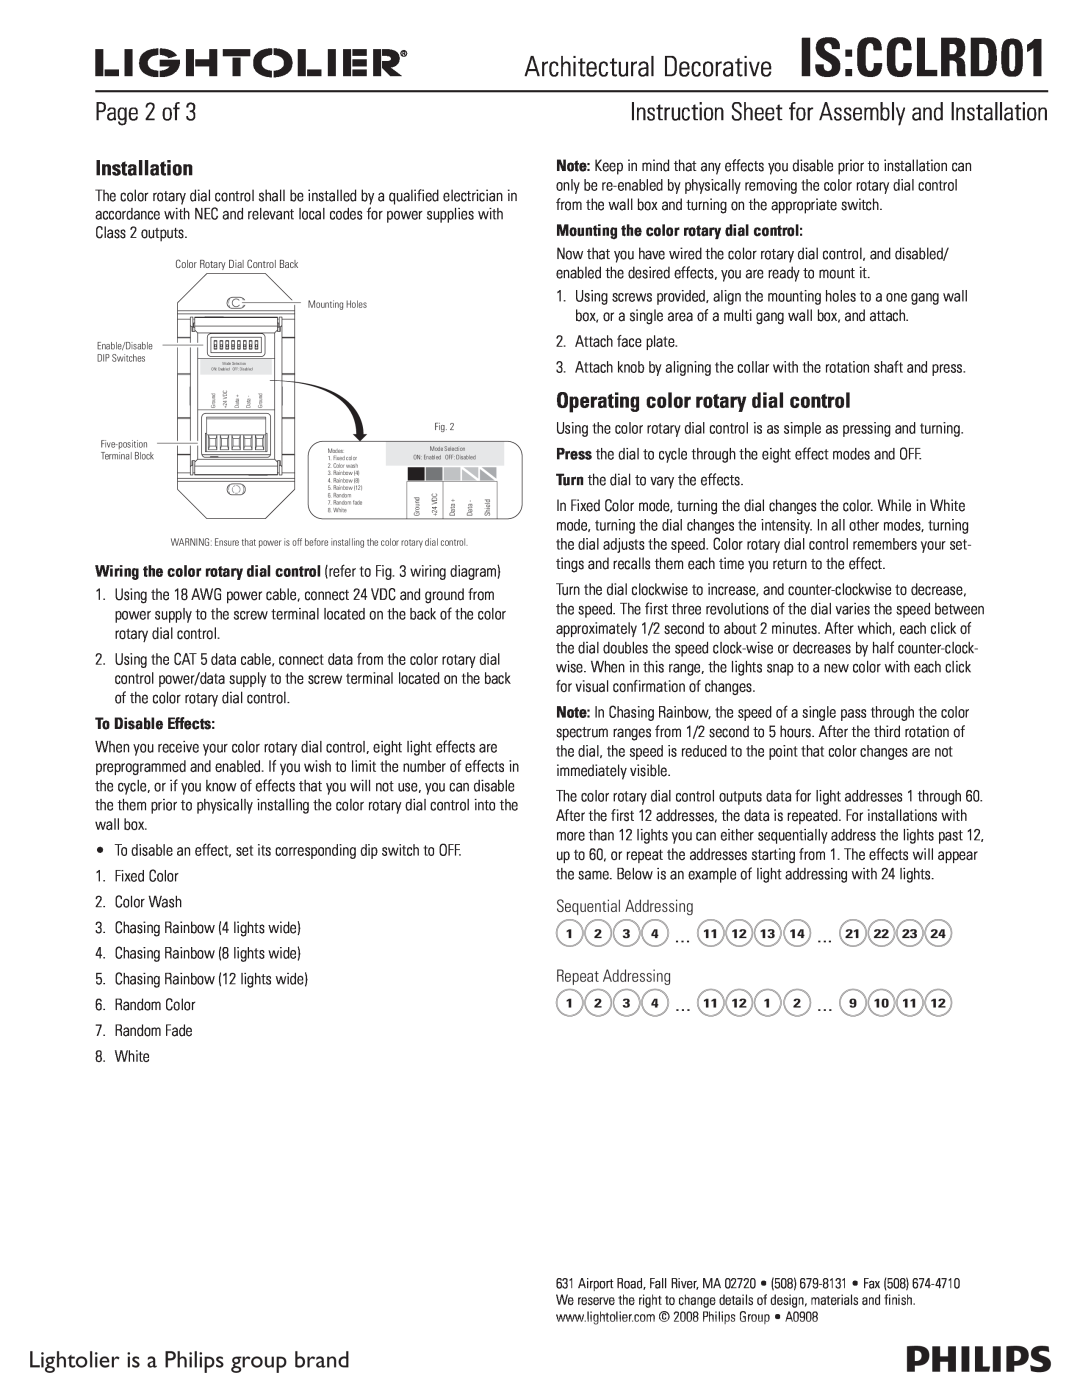 Lightolier Page 2 of, Instruction Sheet for Assembly and Installation, Architectural DecorativeIS CCLRD01 